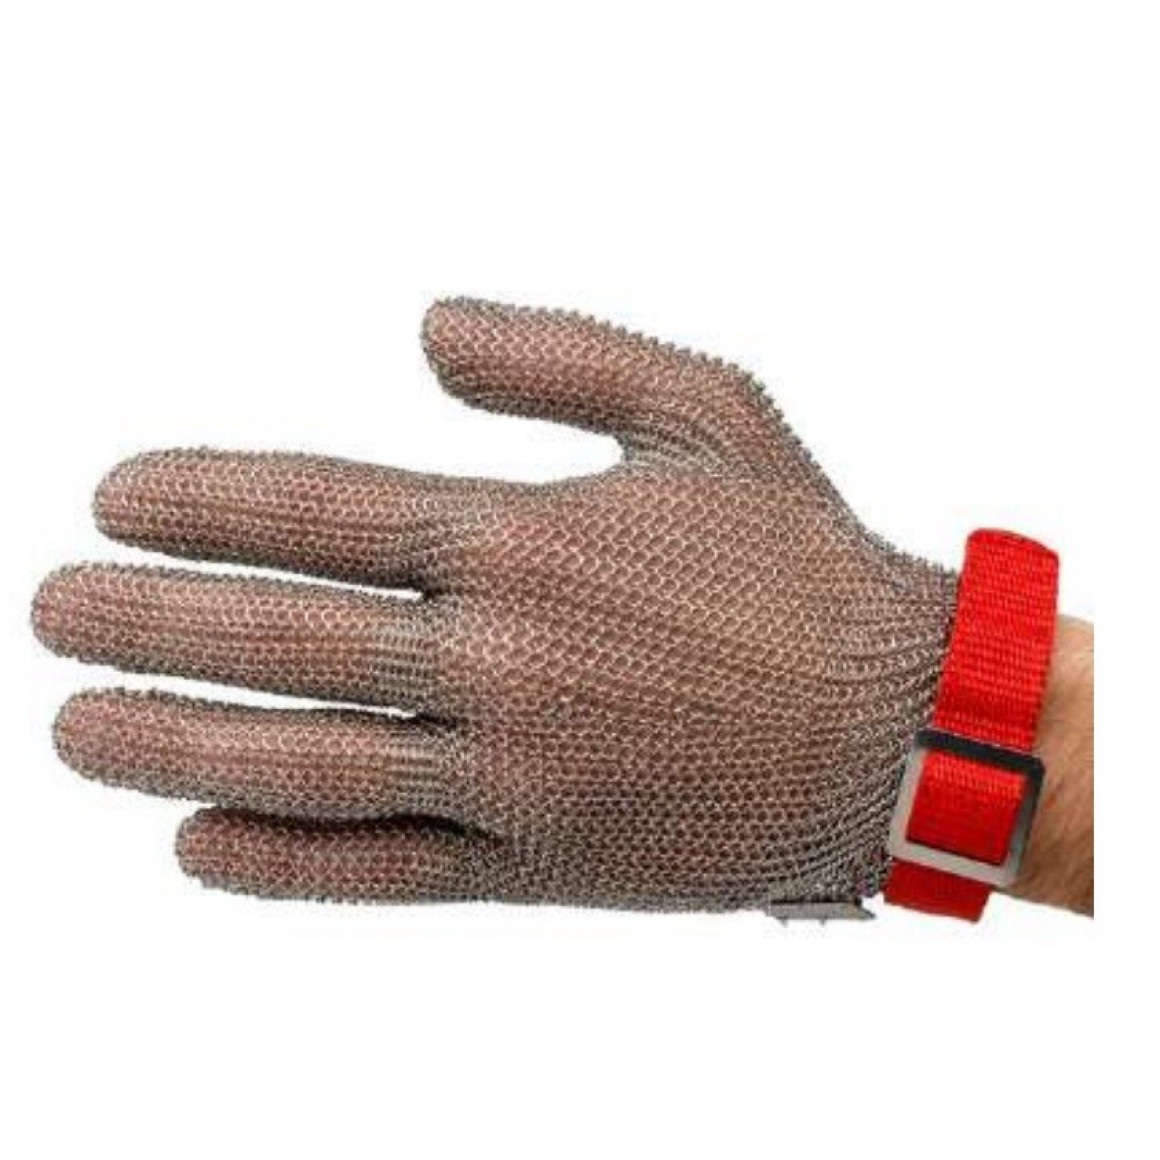 Stainless steel chainmail gloves - size L